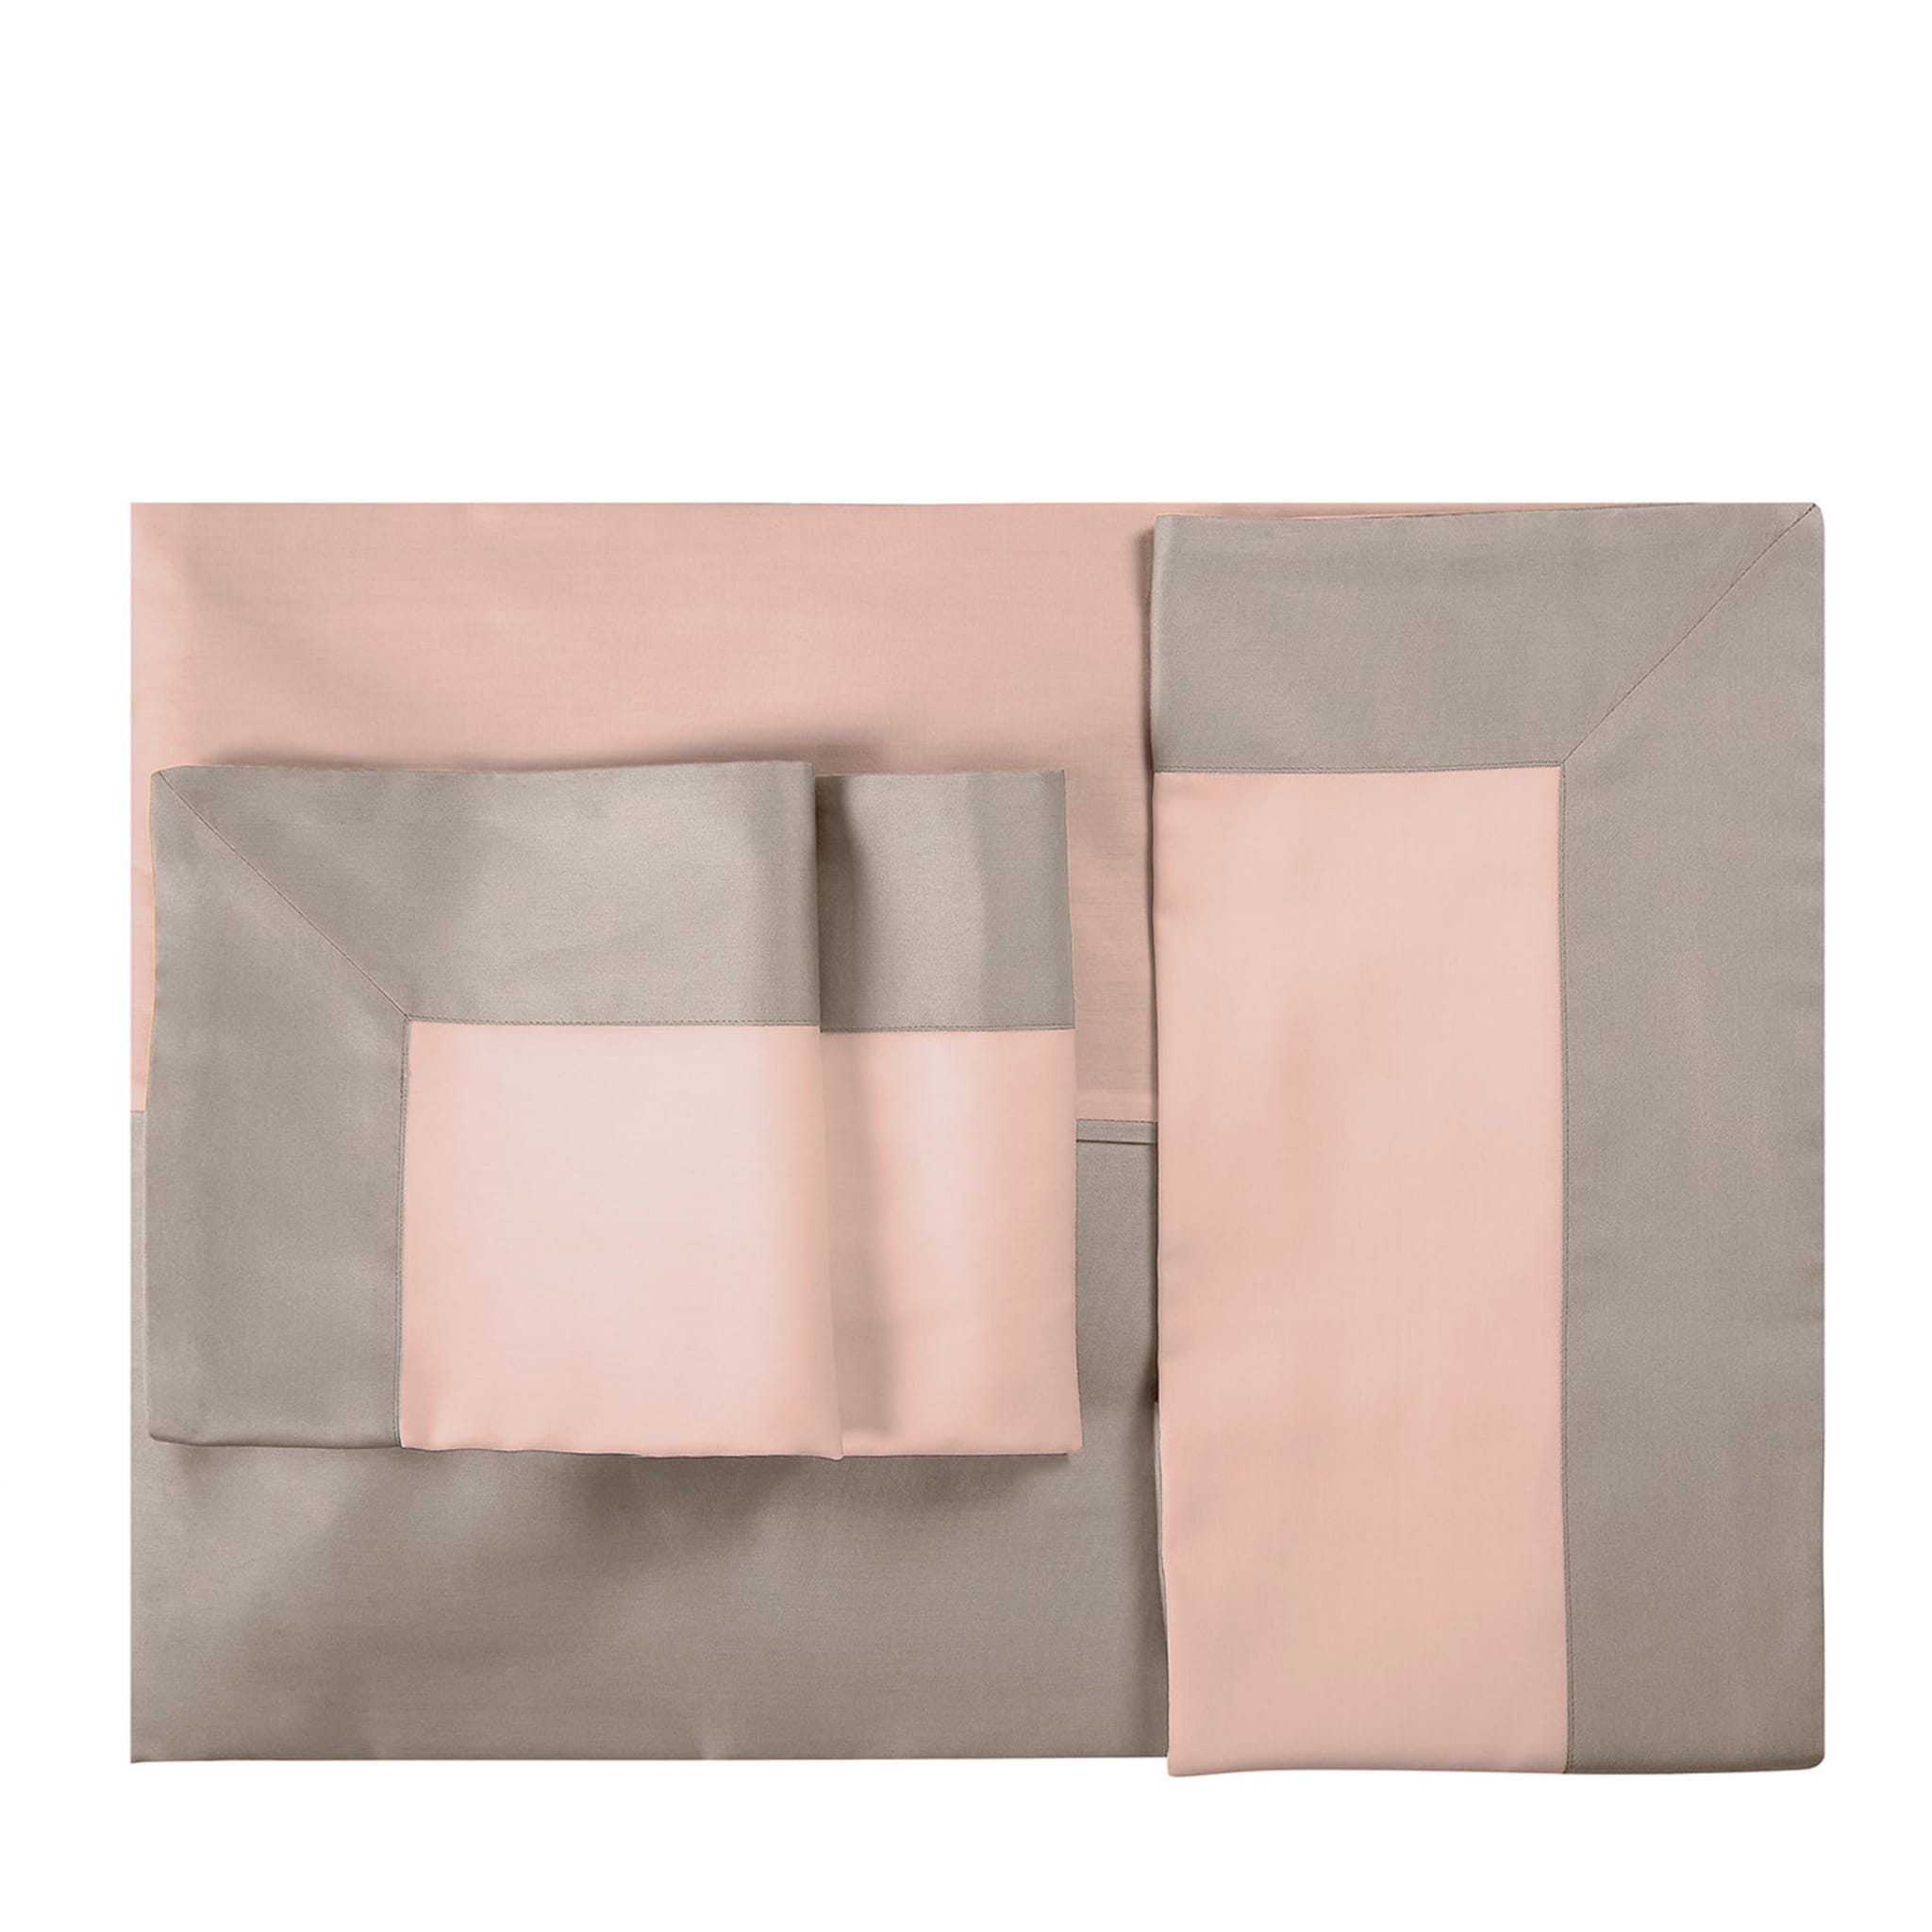 Apollo Set of Dusty-Pink & Taupe Duvet Cover and 2 Pillowcases  - Main view